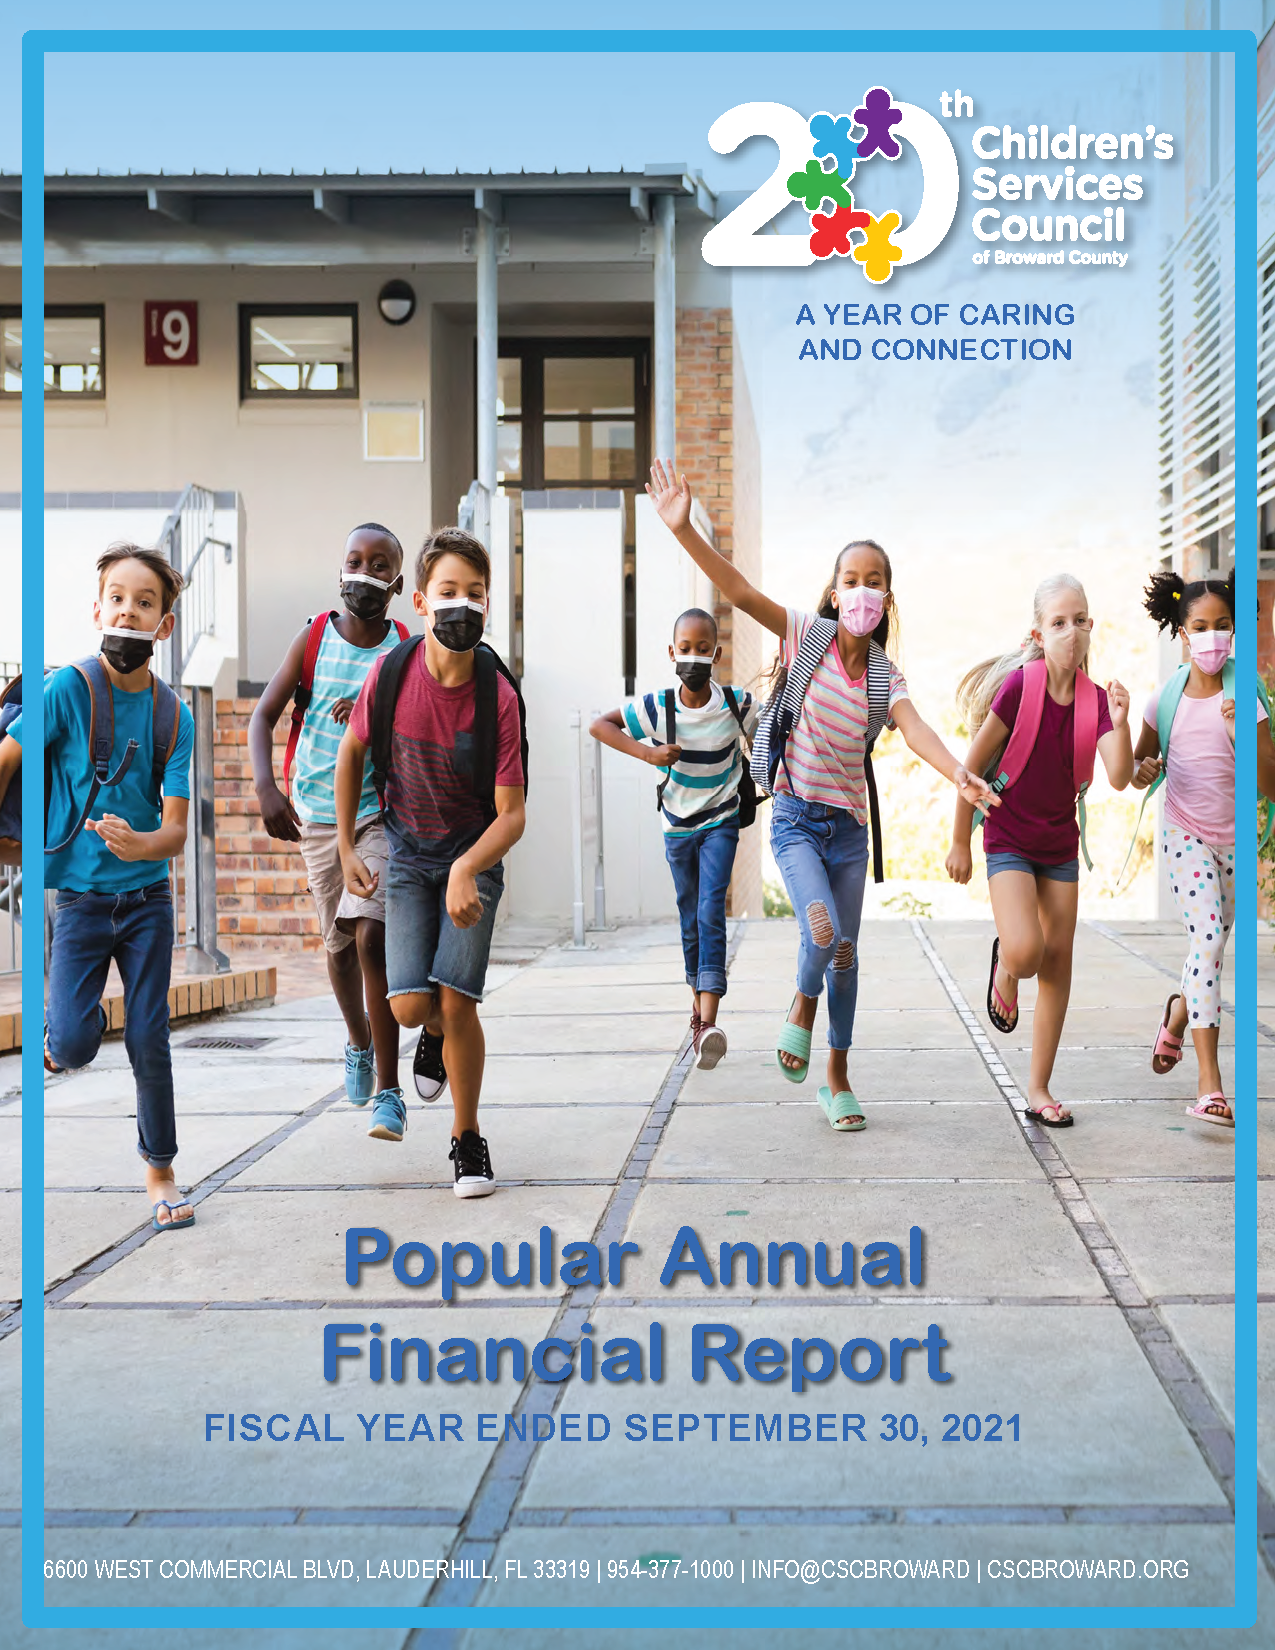 Popular Annual Financial Report (PAFR): FY 2020-2021